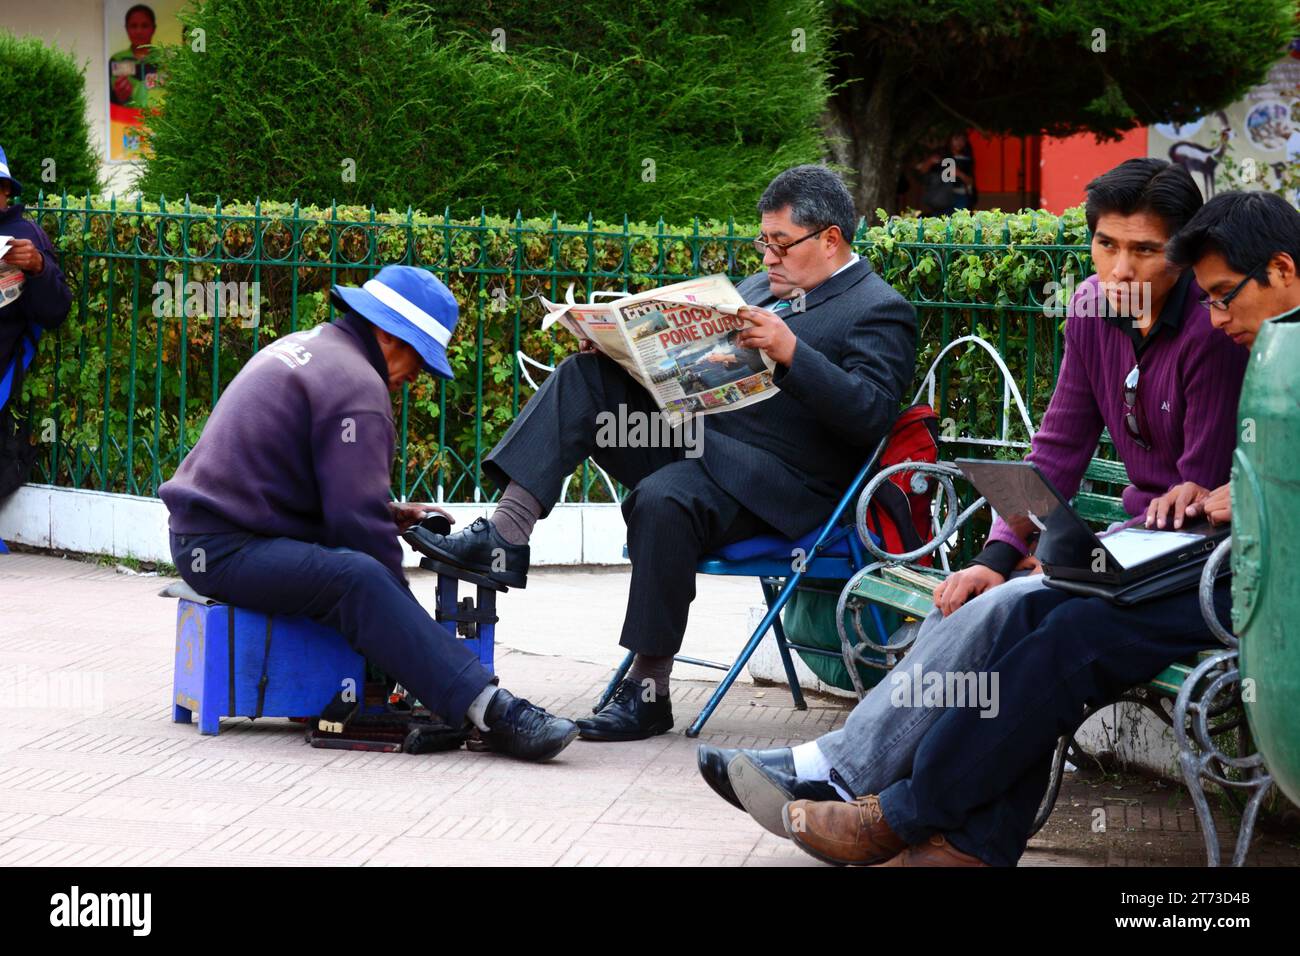 A man wearing a dark suit reads a newspaper while getting his shoes shined in the Plaza de Armas central square, Puno, Peru Stock Photo